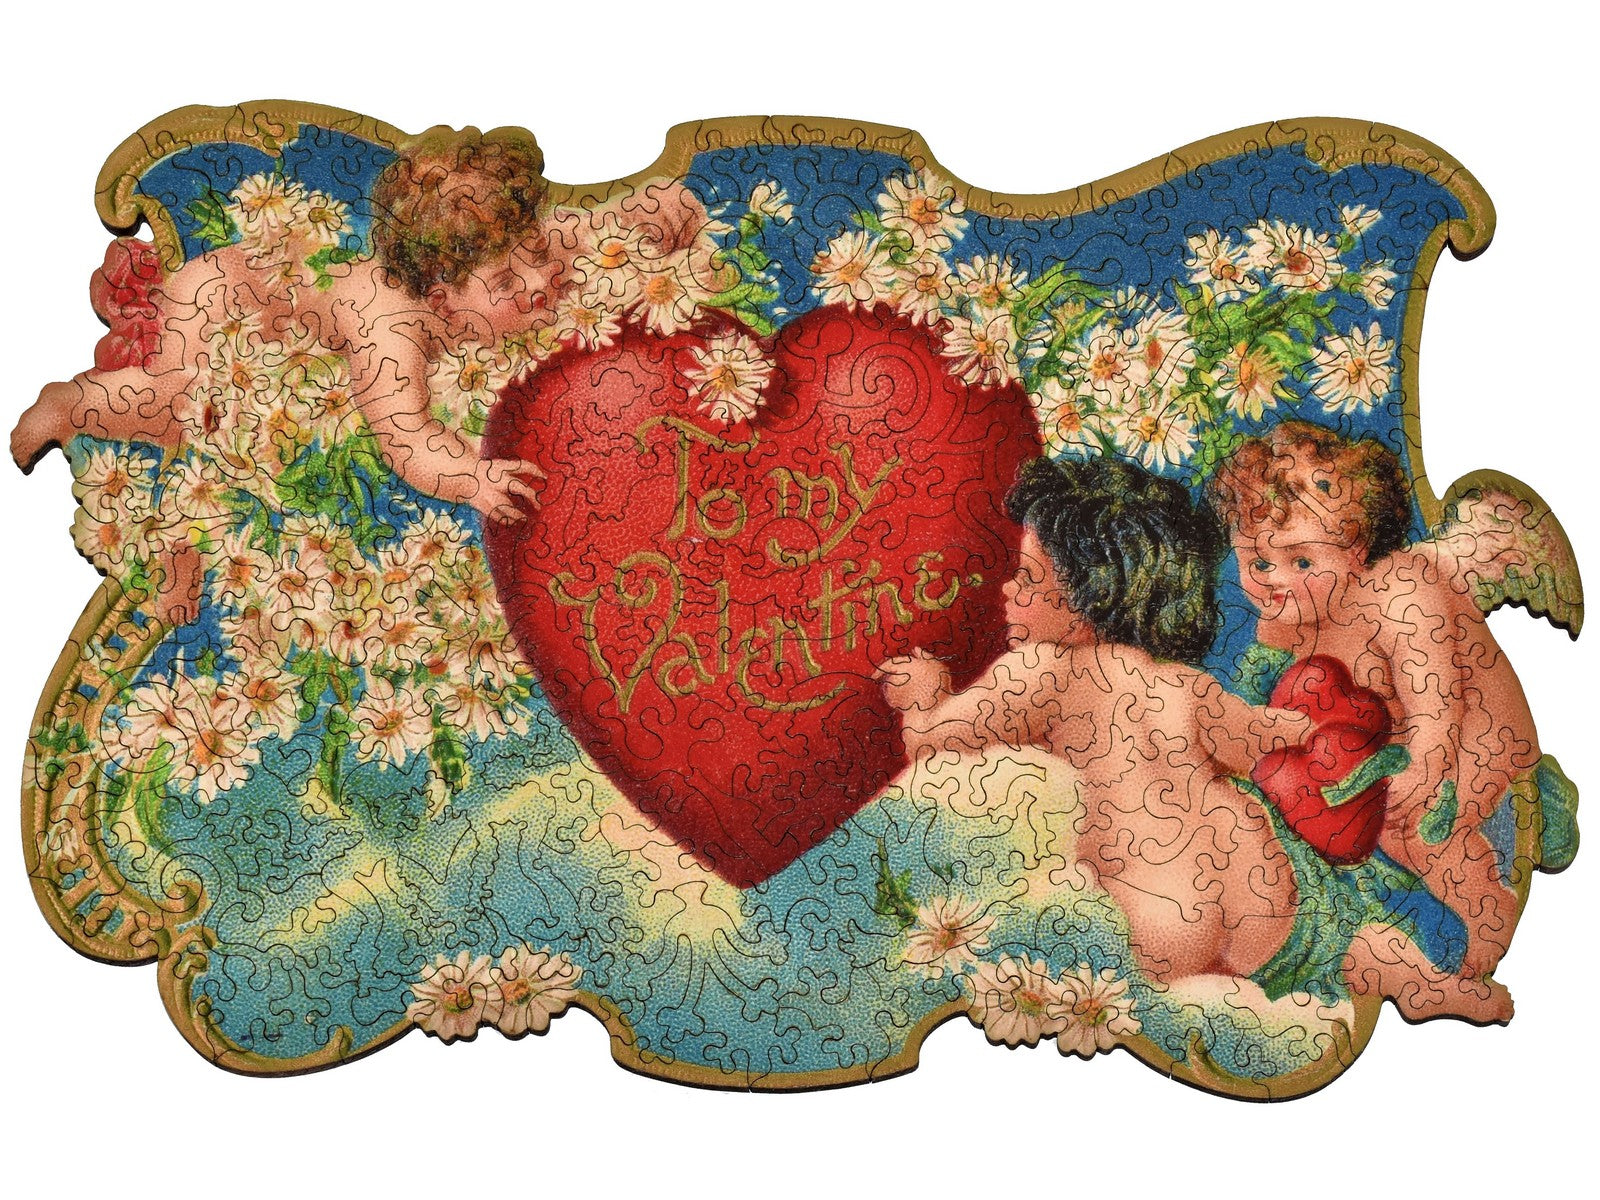 The front of the puzzle Cupid Garden Party, which shows three cherubs and flowers surrounding a heart with the words, "to my valentine".